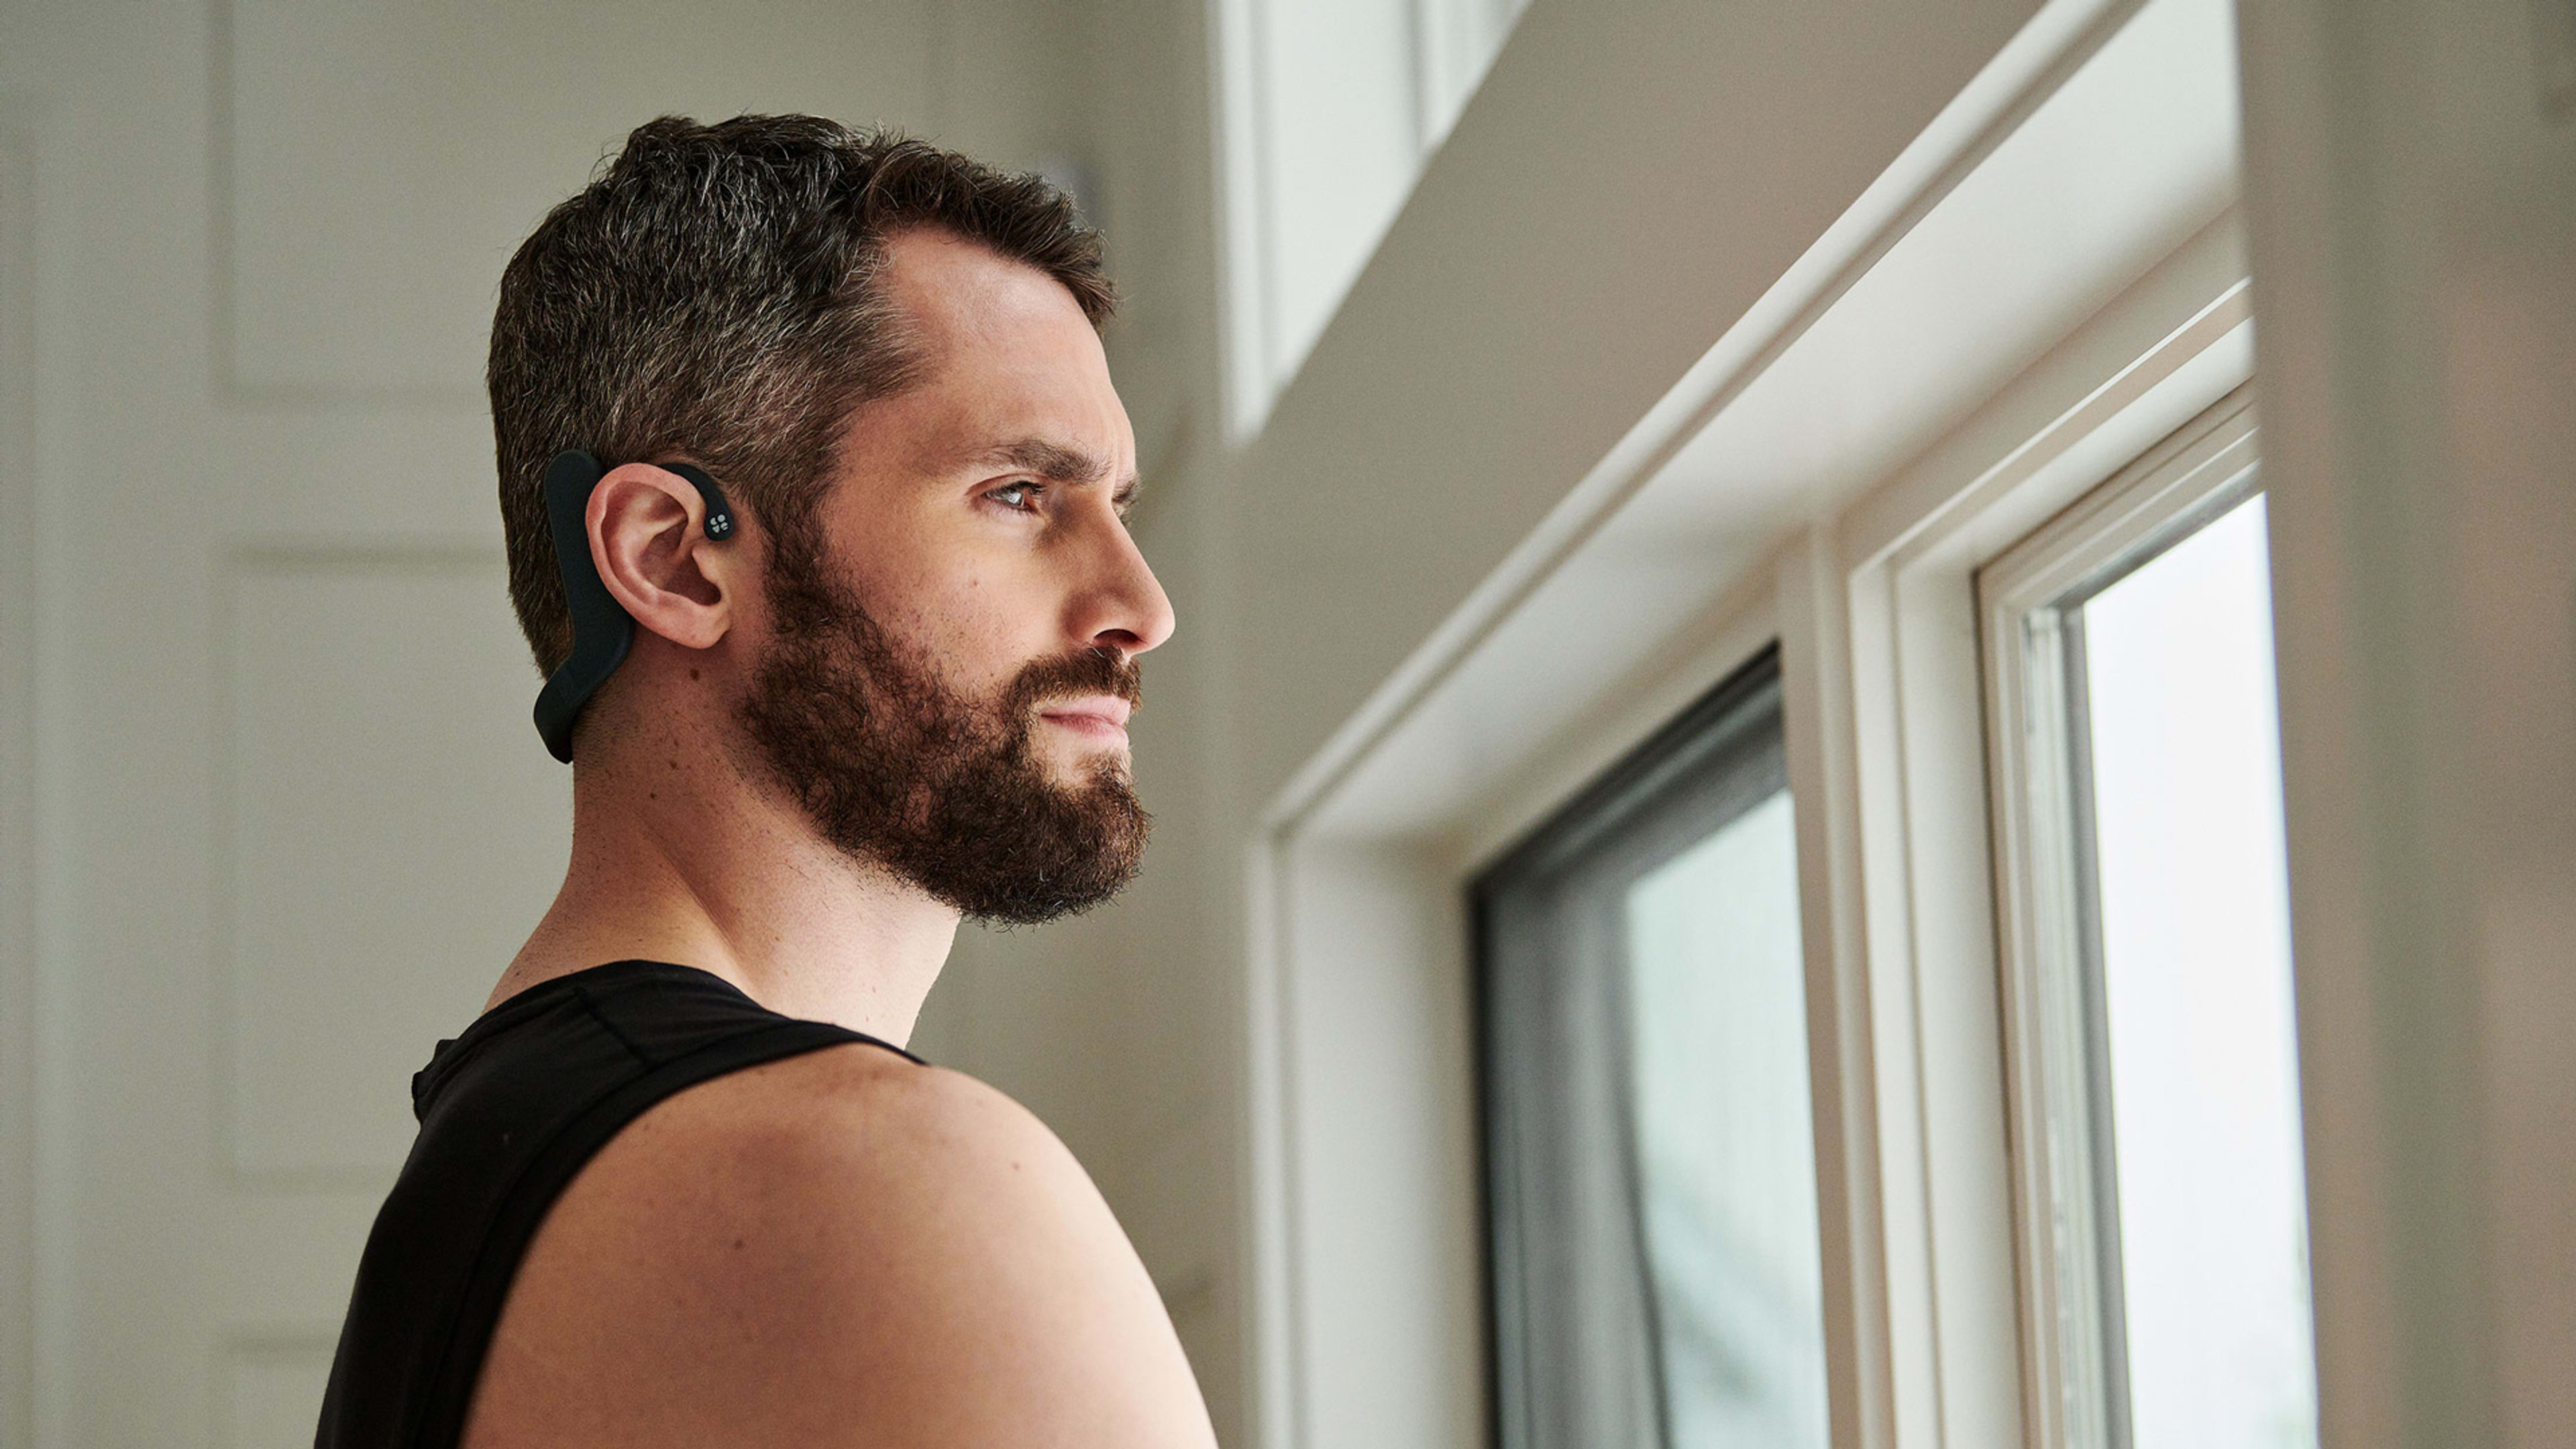 Kevin Love on mental health issues, and the gadget he uses to treat his anxiety